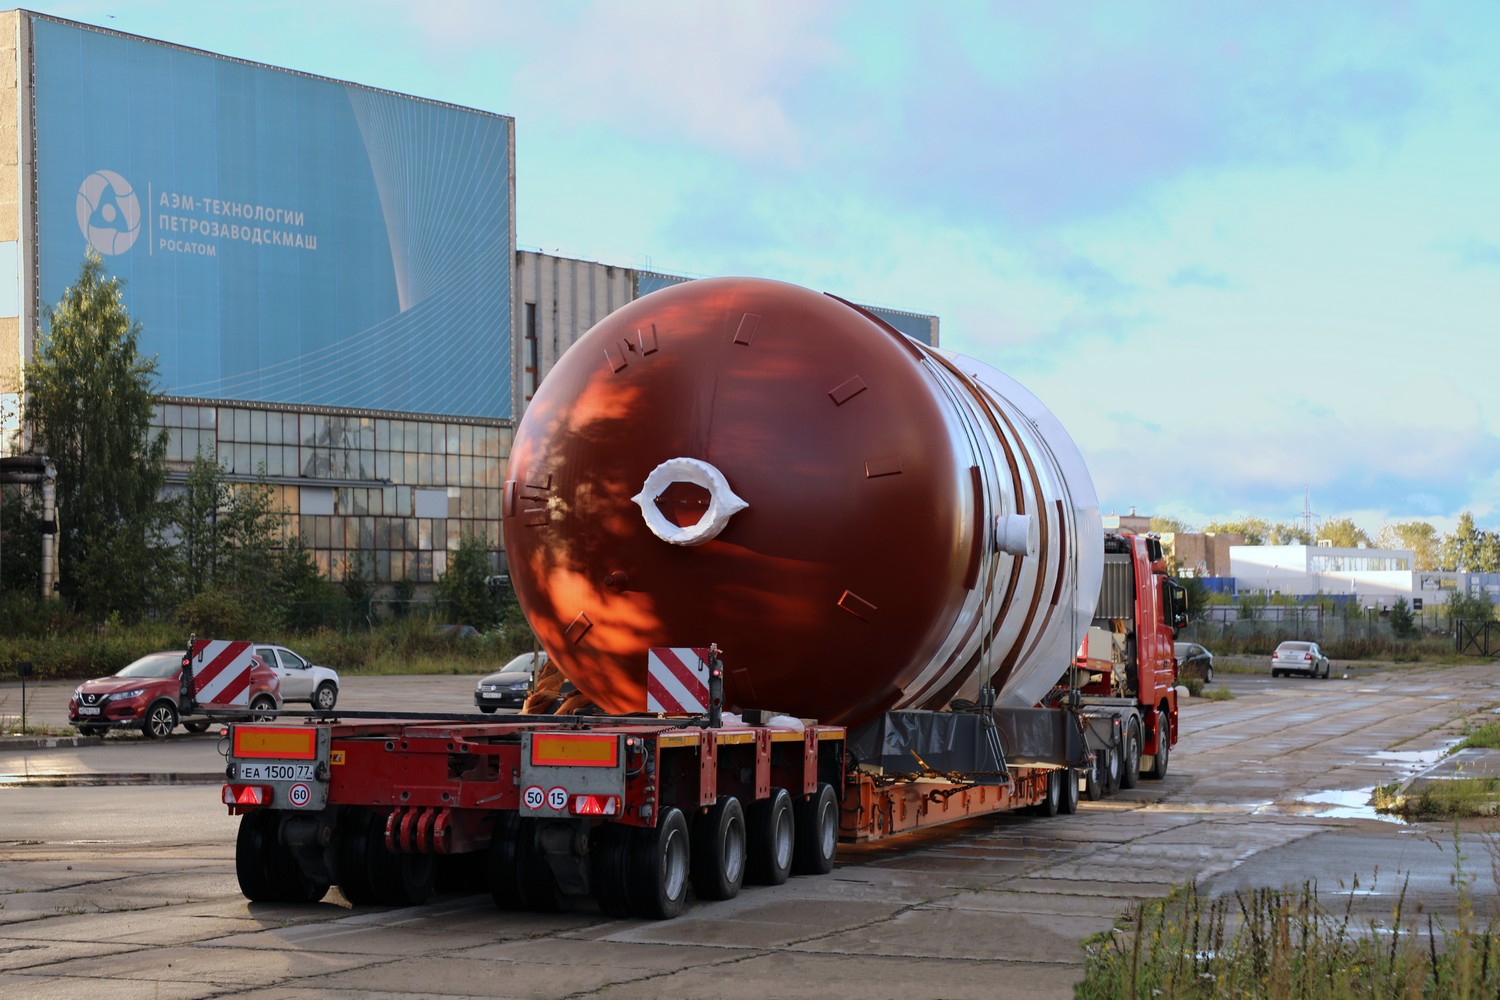 Petrozavodskmash started shipping safety system accumulators for Rooppur NPP